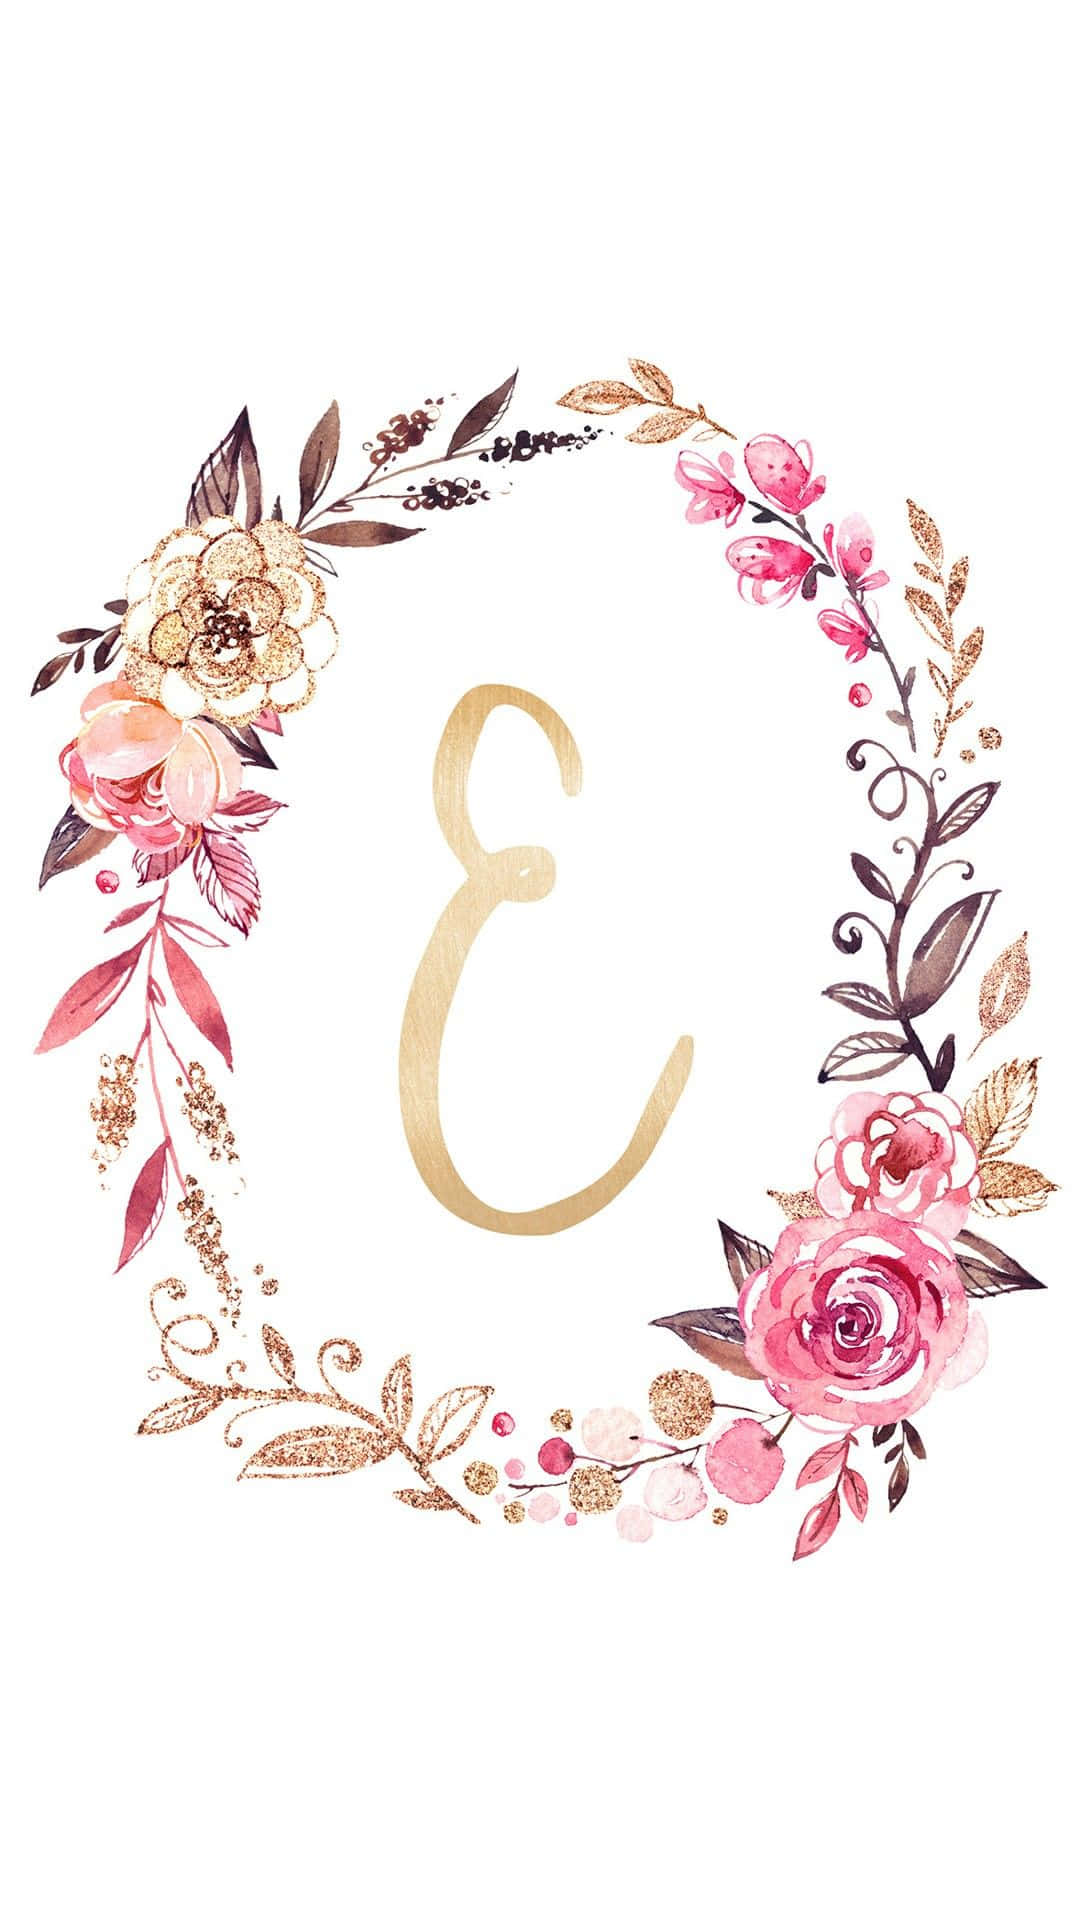 A Watercolor Floral Wreath With The Number 3